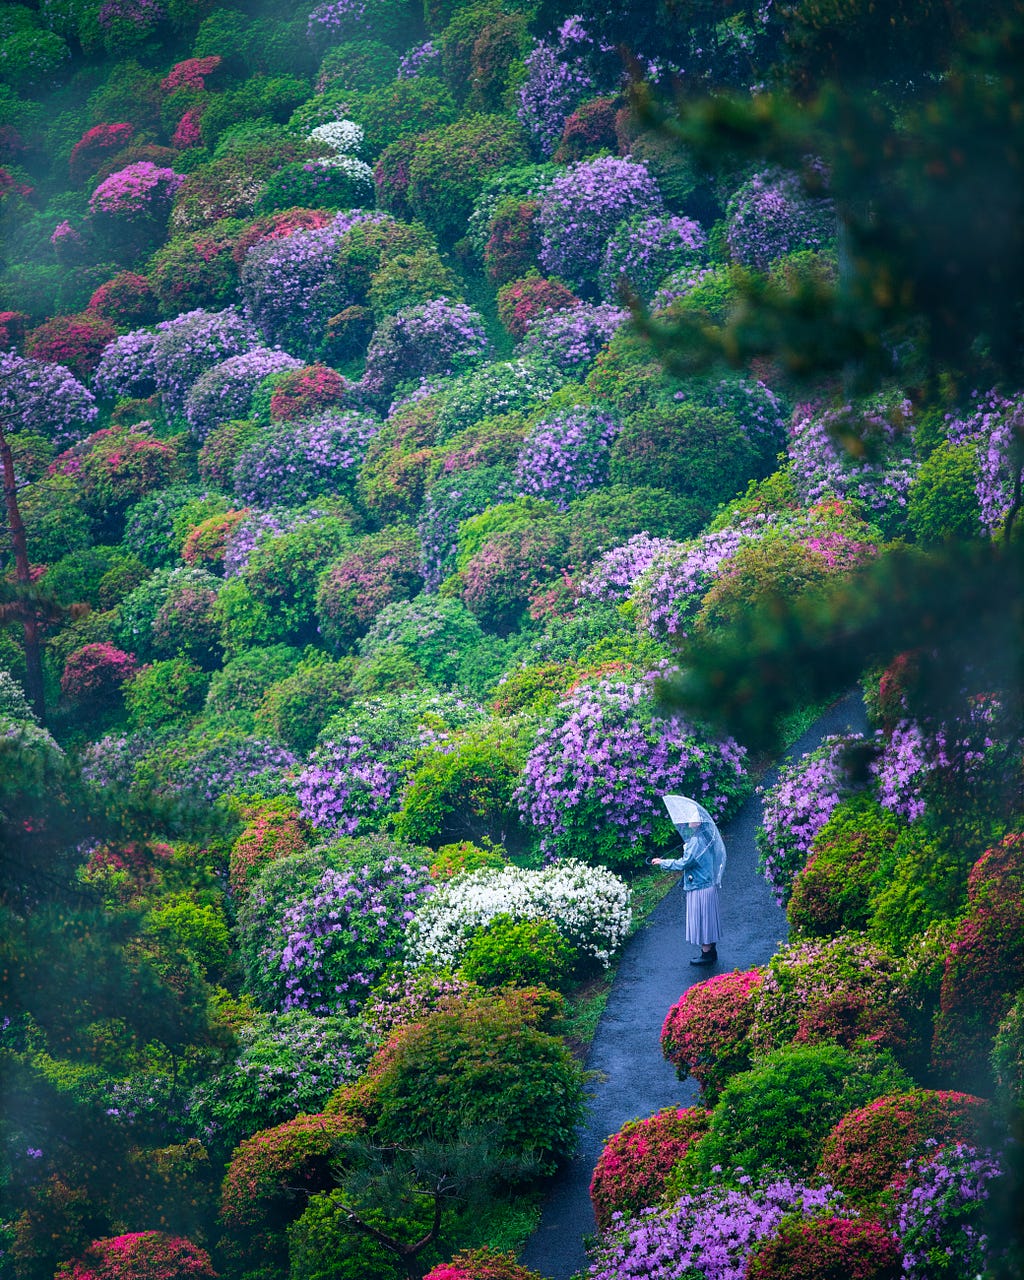 A pathway through a ravine of flowering bushes. A nun stands on the pathway.